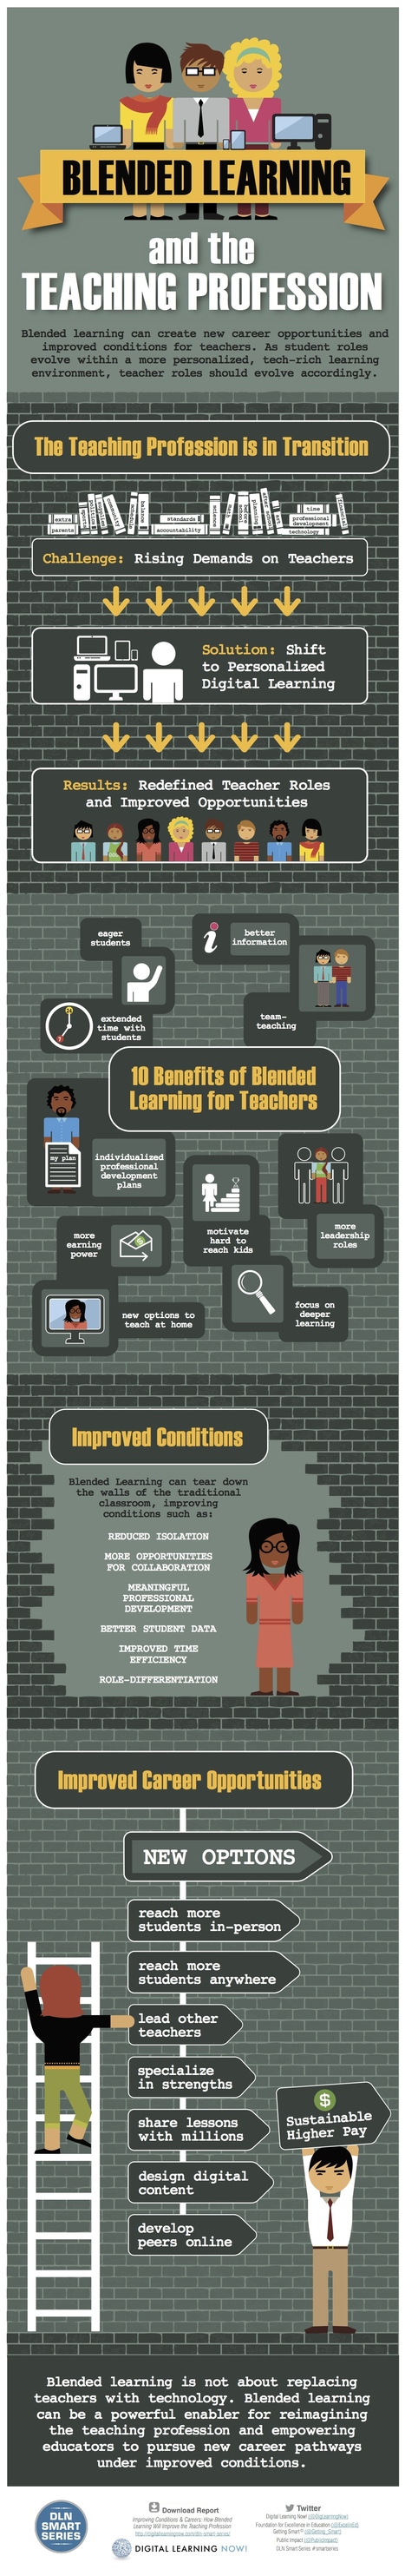 10 Reasons Teachers should Try Blended Learning [Infographic] | 21st Century Learning and Teaching | Scoop.it